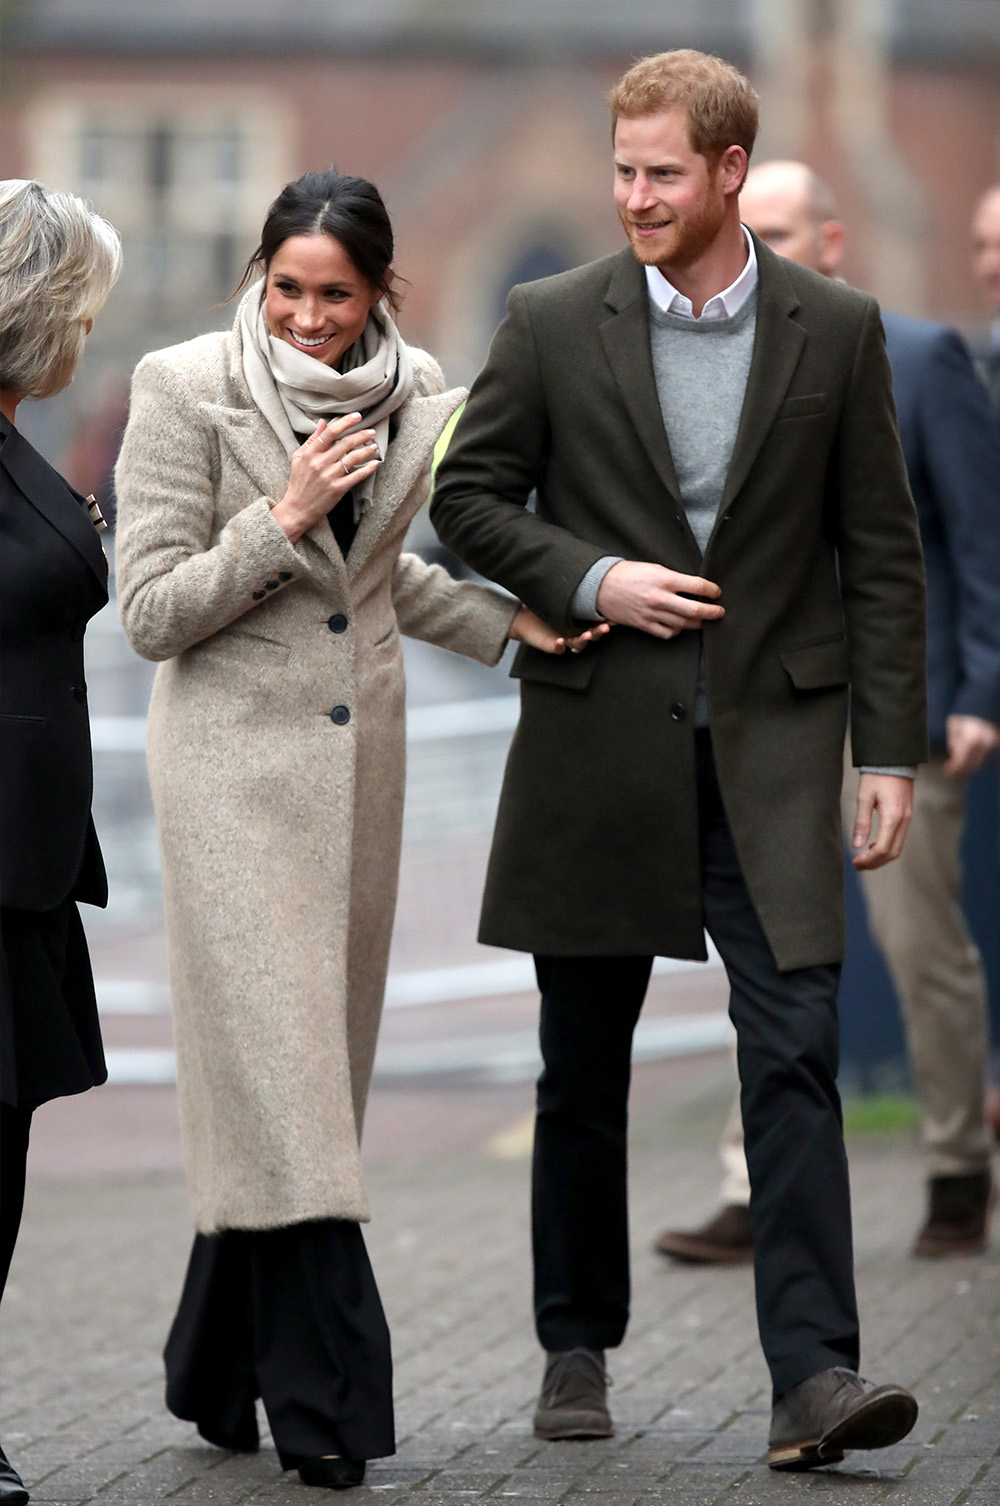 January 9, 2018: Meghan Markle visits Reprezent 107.3FM in London, England. She arrived in Brixton looking a little bit more laidback than we've seen her before (remember the Ralph & Russo gown in those engagement photos?), teaming a pair of wide leg trousers by Burberry with a Smythe coat, a Jigsaw scarf and swept-back hair.